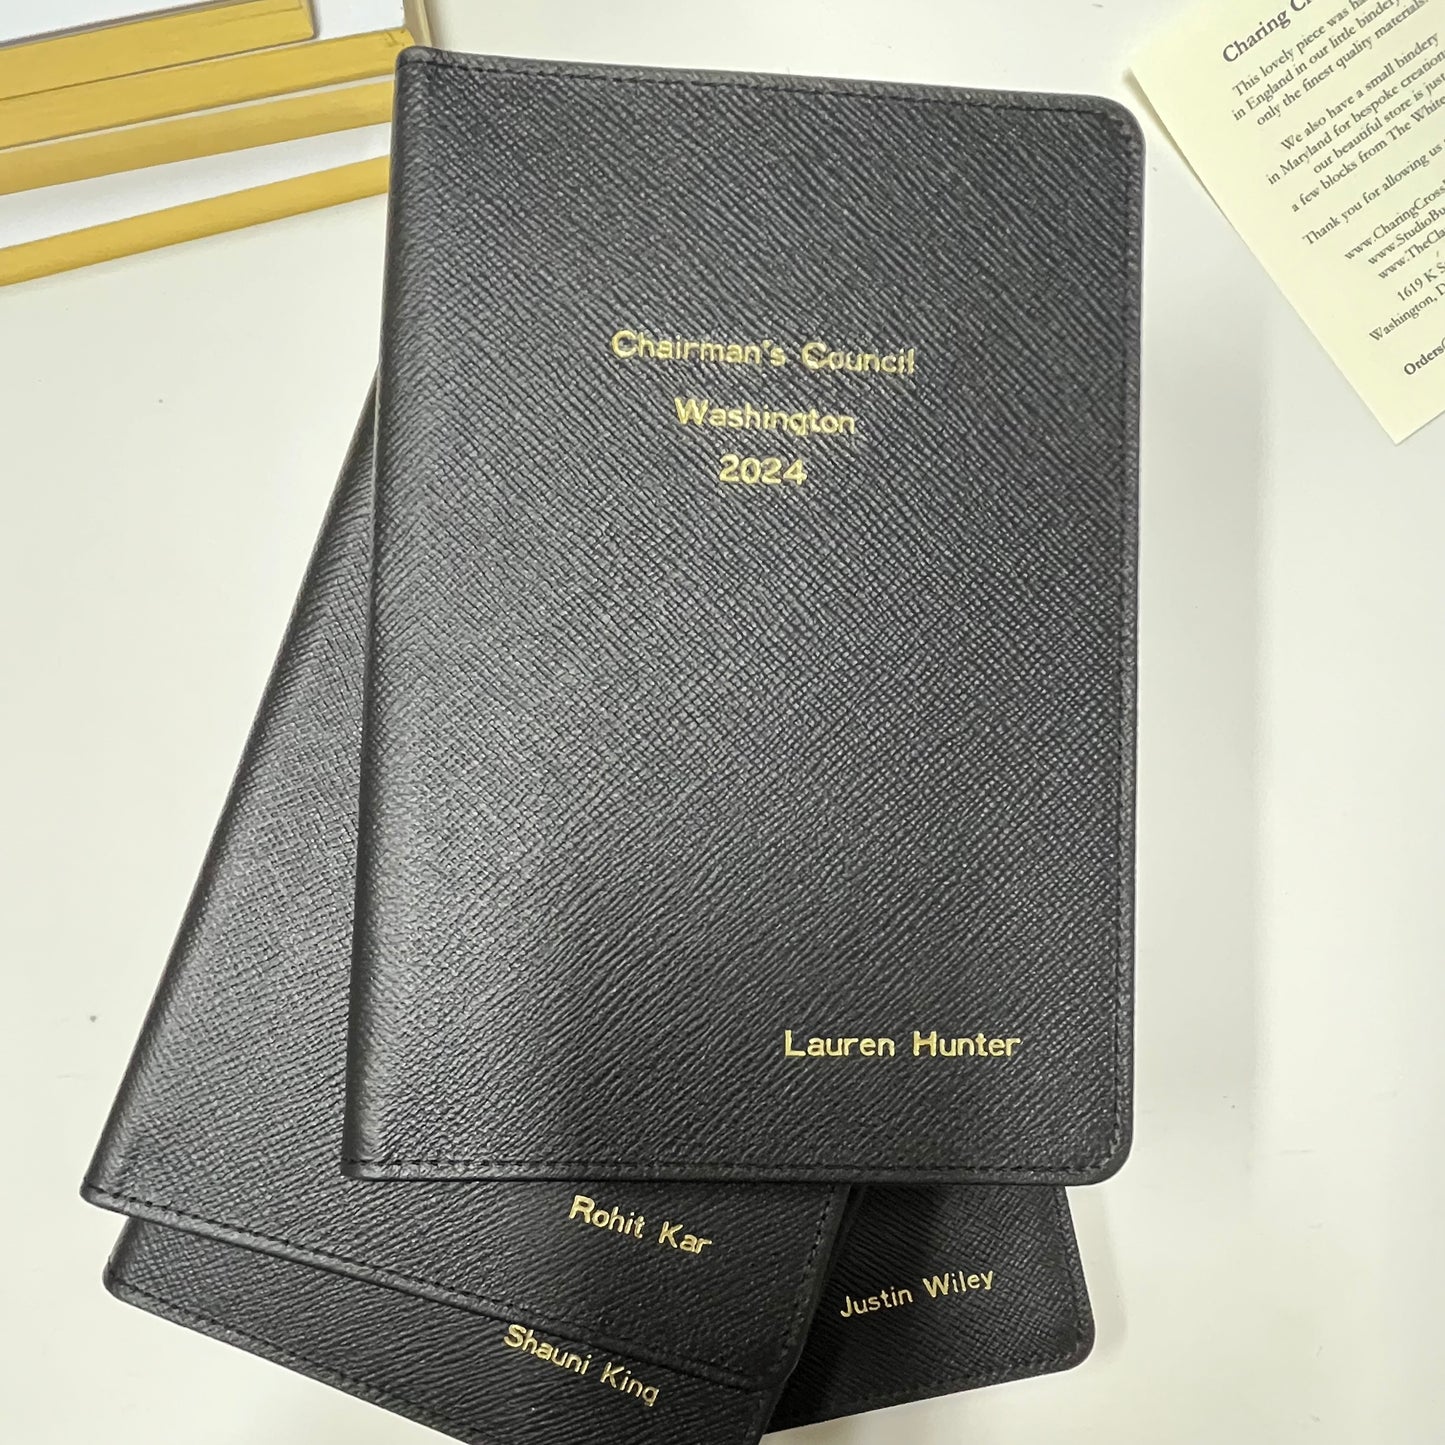 Gallup | Chairman's Council Washington 2024 | Custom Journal Book with Gold Stamping